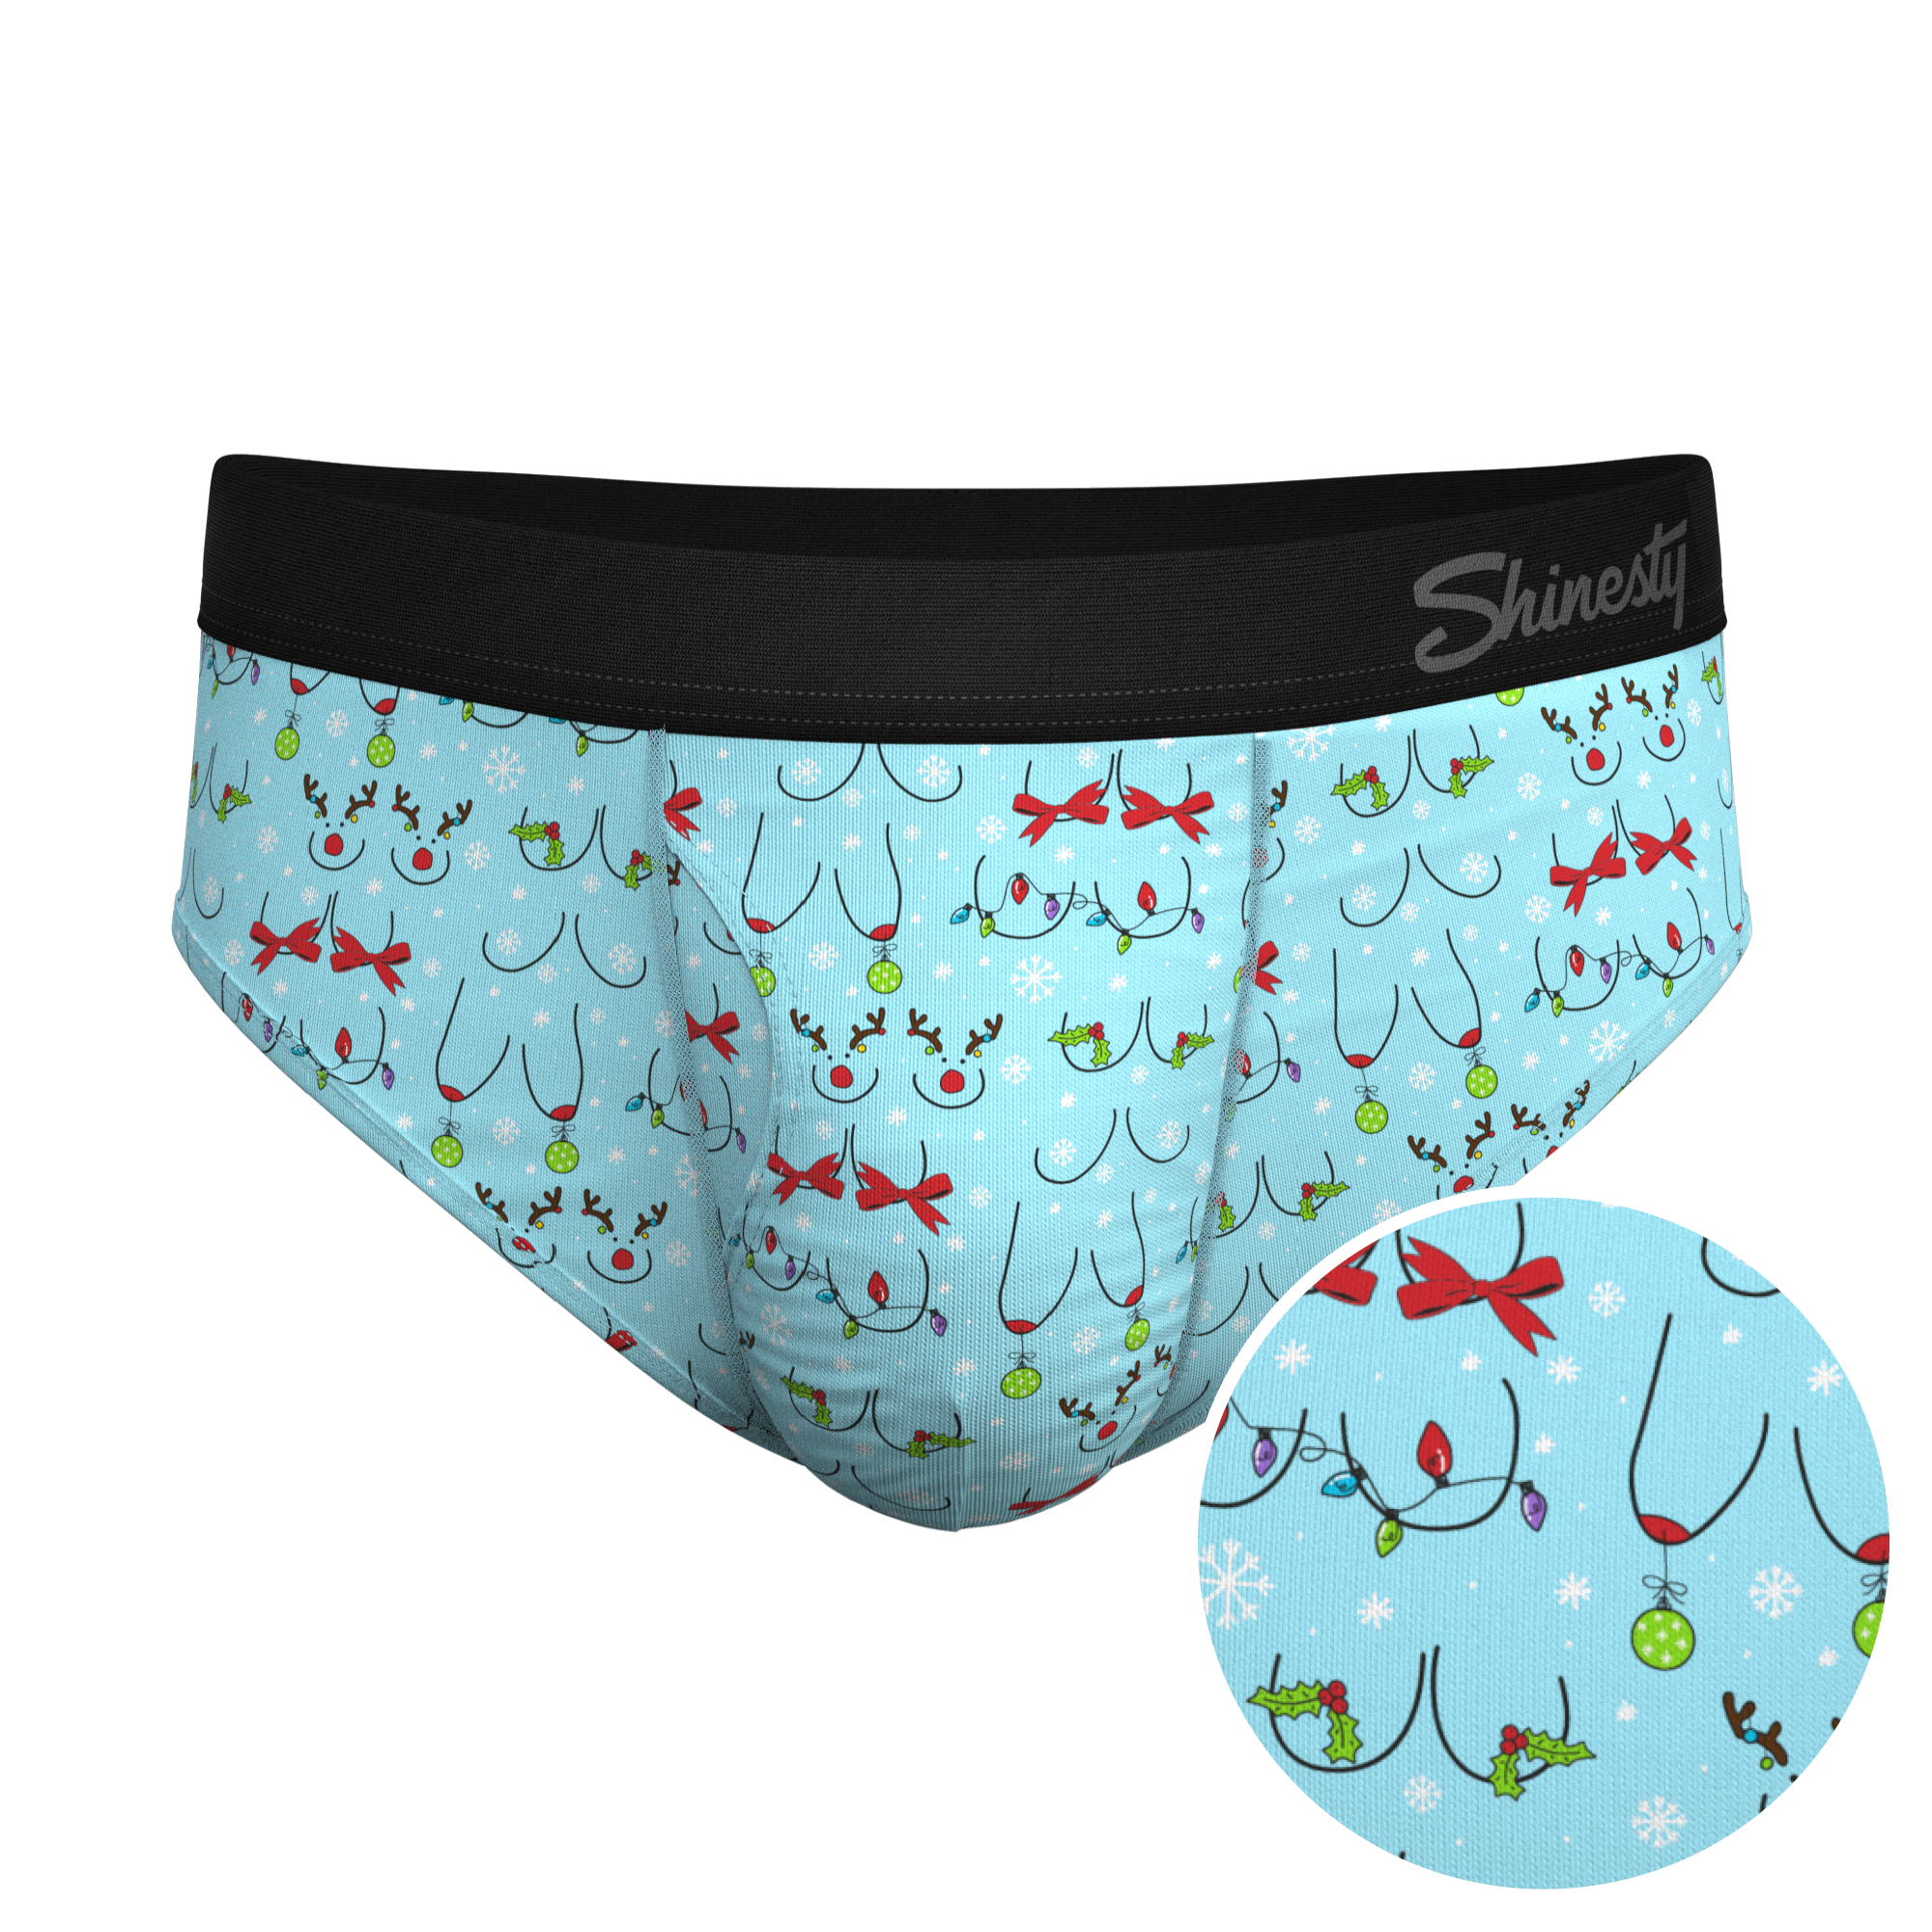 The Christmas Key Party - Shinesty Christmas Characters Ball Hammock Pouch  Underwear Briefs XL